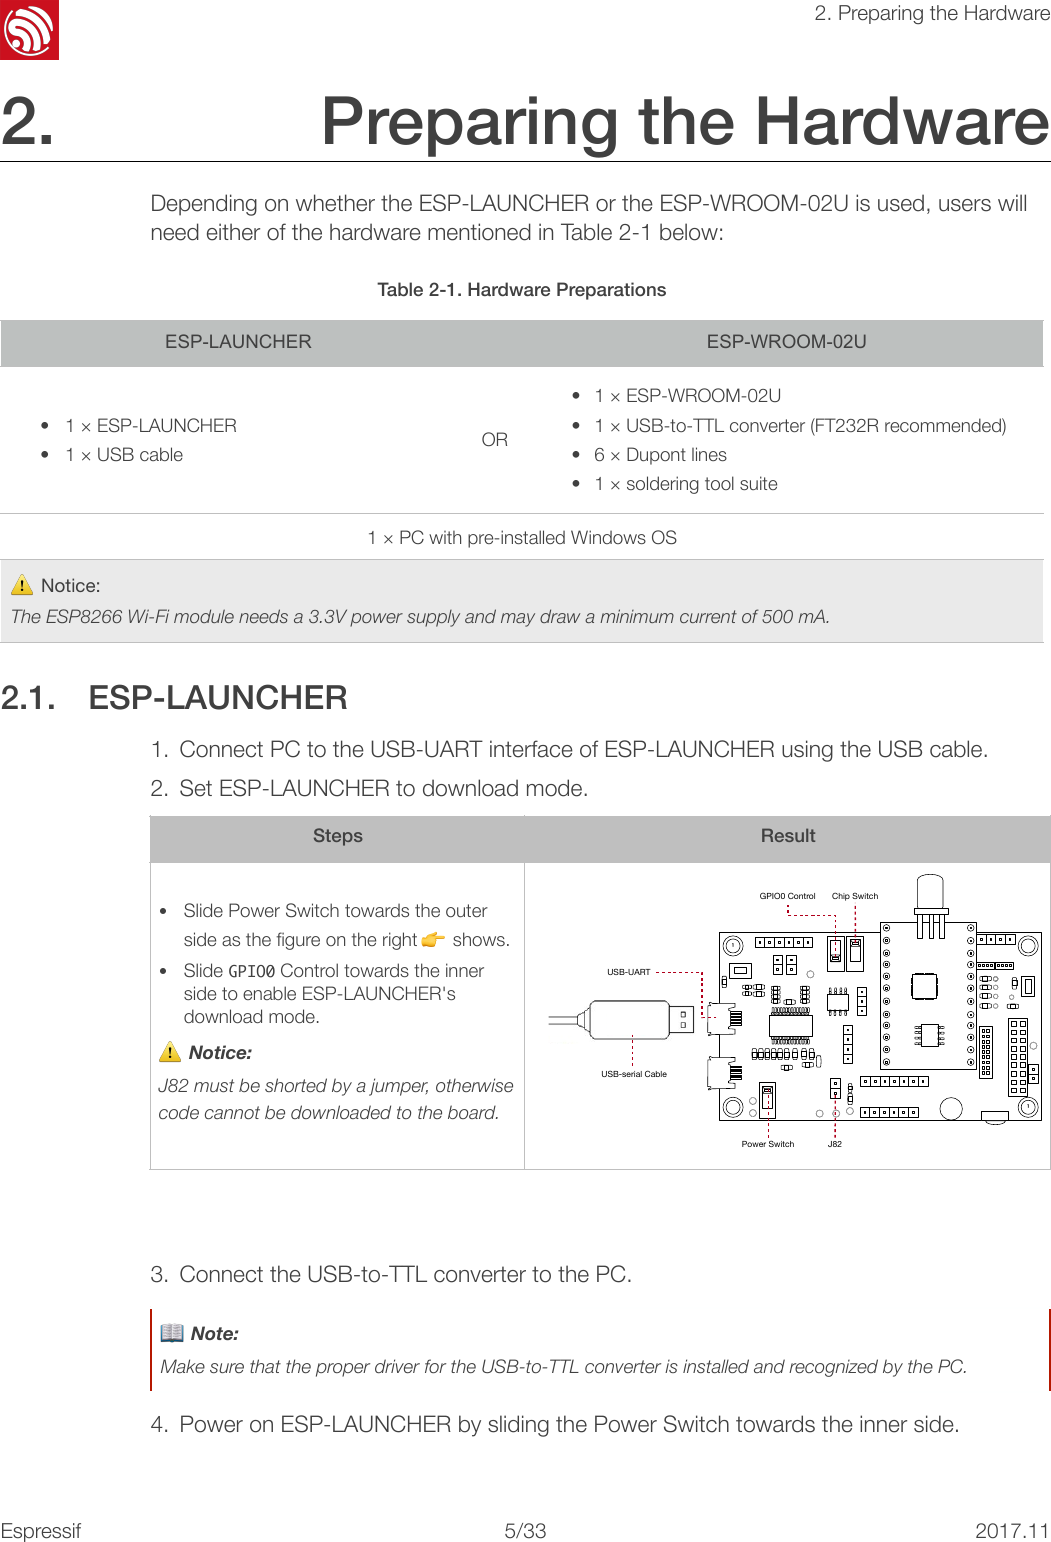 !2. Preparing the Hardware2. Preparing the Hardware Depending on whether the ESP-LAUNCHER or the ESP-WROOM-02U is used, users will need either of the hardware mentioned in Table 2-1 below: 2.1. ESP-LAUNCHER 1. Connect PC to the USB-UART interface of ESP-LAUNCHER using the USB cable. 2. Set ESP-LAUNCHER to download mode. 3. Connect the USB-to-TTL converter to the PC. 4. Power on ESP-LAUNCHER by sliding the Power Switch towards the inner side. Table 2-1. Hardware PreparationsESP-LAUNCHERESP-WROOM-02U• 1 × ESP-LAUNCHER  • 1 × USB cableOR• 1 × ESP-WROOM-02U  • 1 × USB-to-TTL converter (FT232R recommended) • 6 × Dupont lines • 1 × soldering tool suite1 × PC with pre-installed Windows OS⚠ Notice: The ESP8266 Wi-Fi module needs a 3.3V power supply and may draw a minimum current of 500 mA.StepsResult•Slide Power Switch towards the outer side as the ﬁgure on the right 👉 shows. •Slide GPIO0 Control towards the inner side to enable ESP-LAUNCHER&apos;s download mode. ⚠ Notice: J82 must be shorted by a jumper, otherwise code cannot be downloaded to the board.!11GPIO0 ControlPower SwitchUSB-serial CableUSB-UARTChip SwitchJ82📖 Note: Make sure that the proper driver for the USB-to-TTL converter is installed and recognized by the PC.Espressif!/!5 332017.11